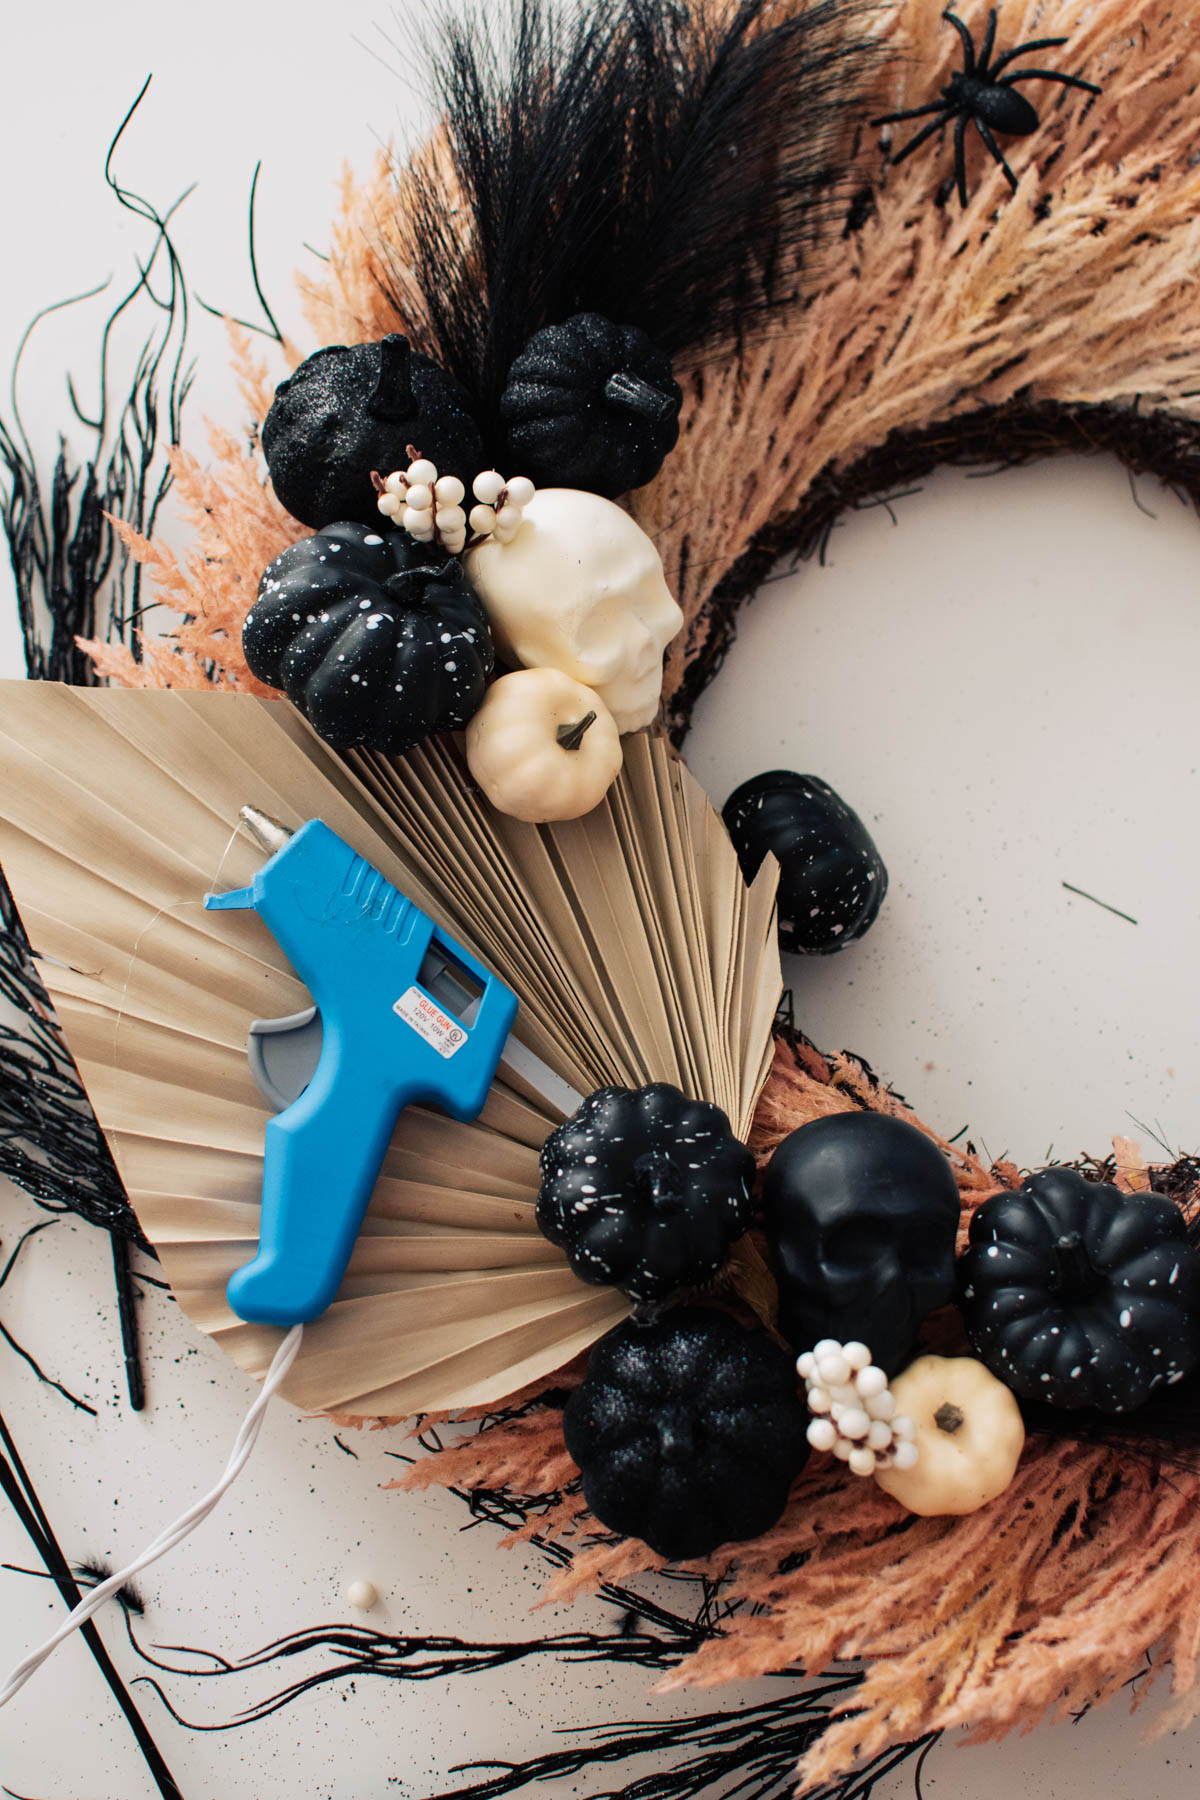 Hot glue gun rests on dried palm leaf next to black and white Halloween items on wreath.